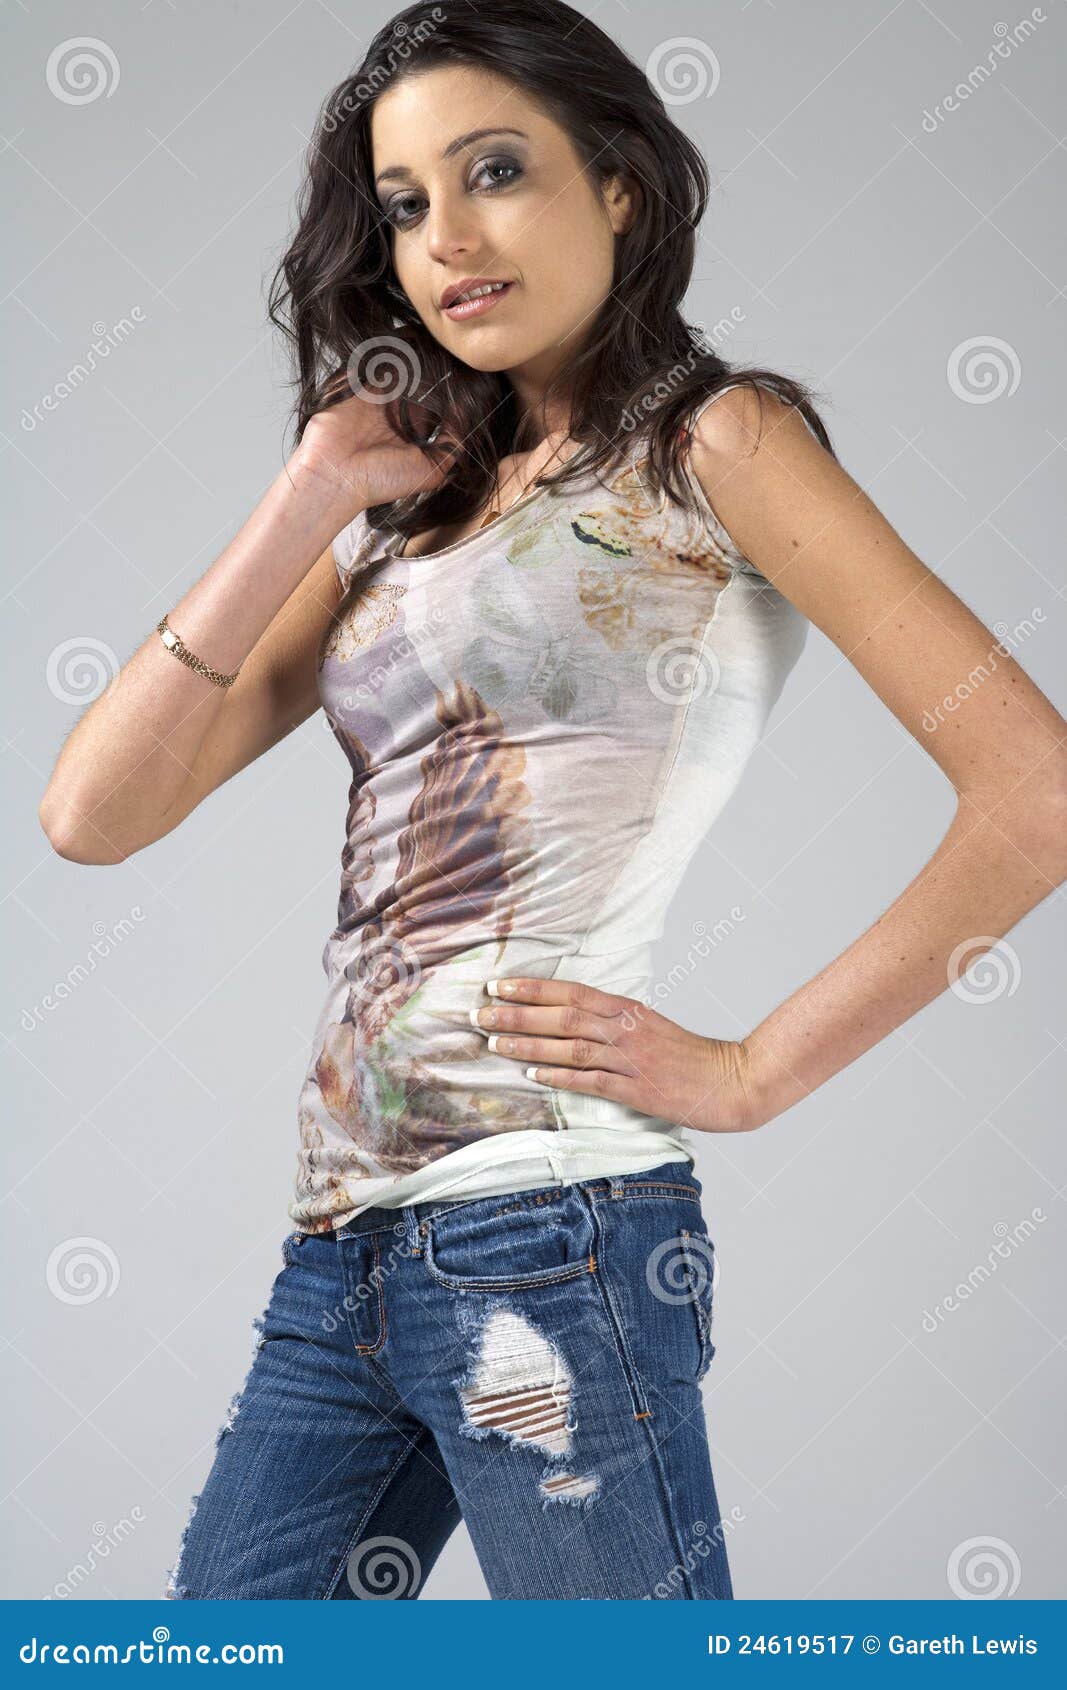 Young Woman in Jeans and White Shirt Stock Image - Image of beautiful ...